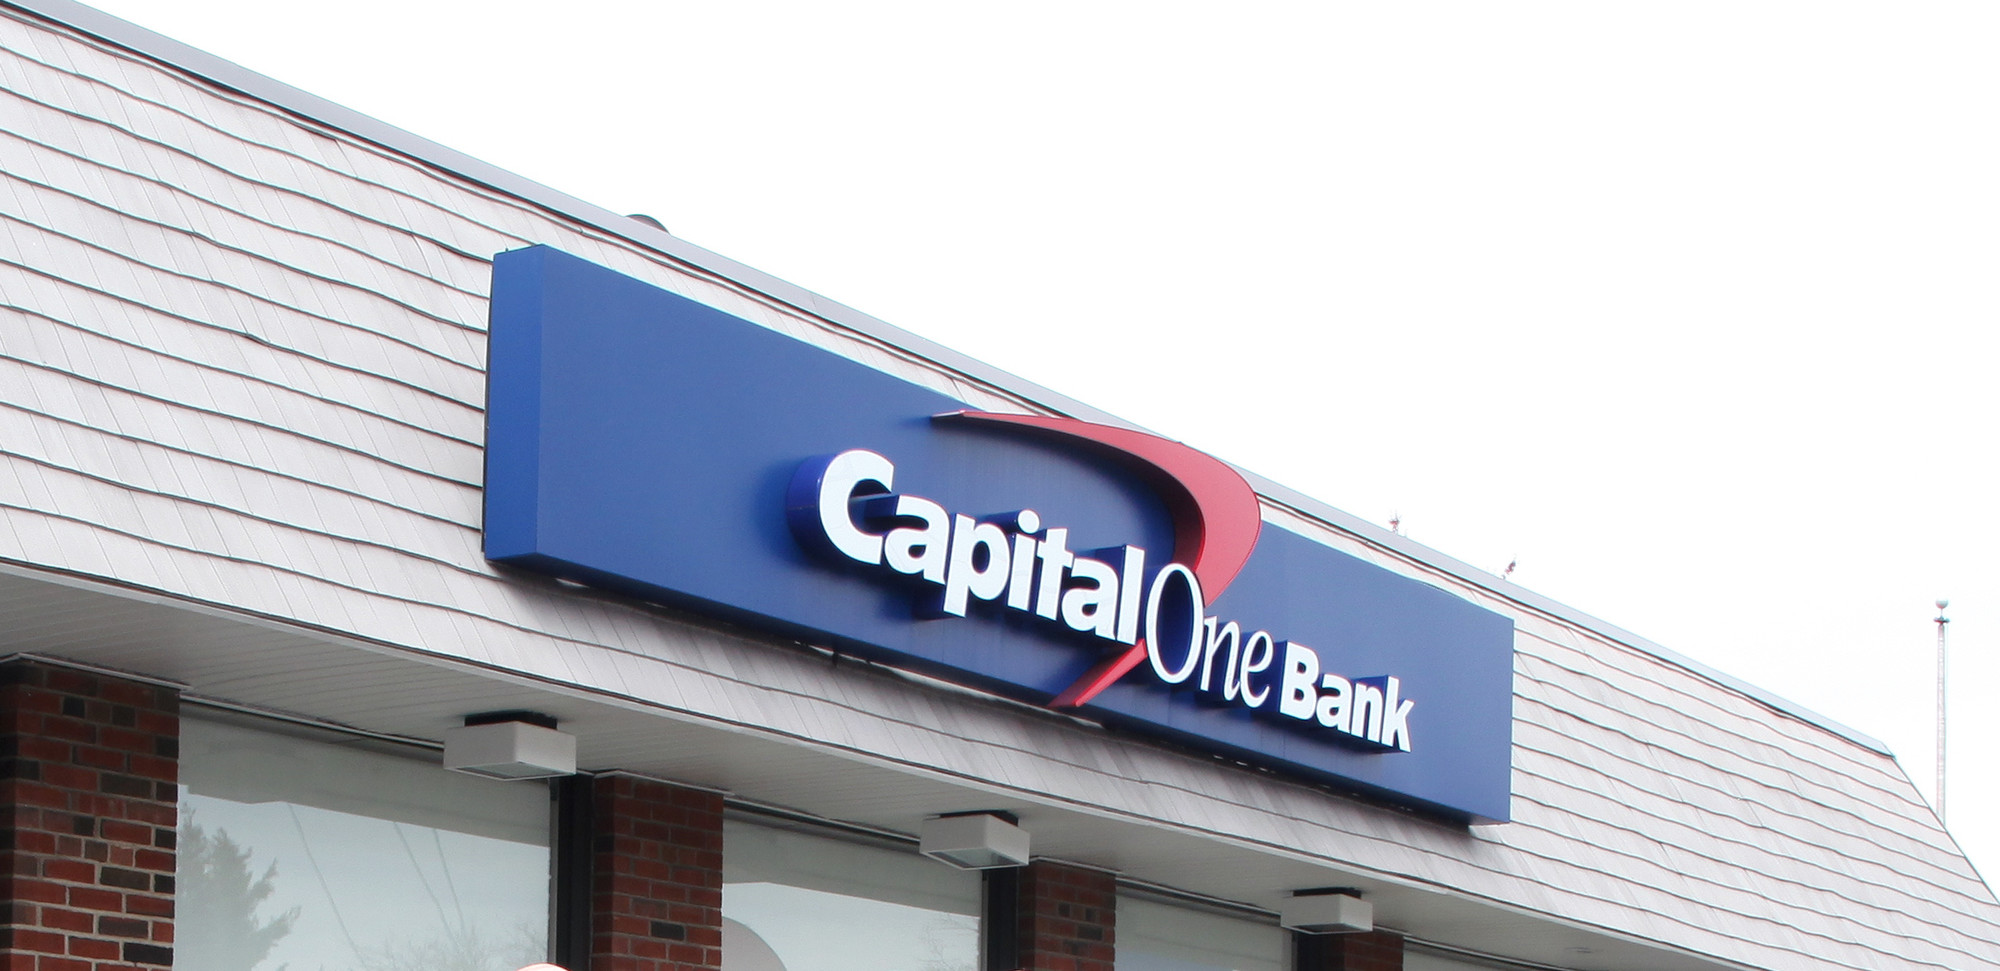 The Capital One Bank on Main Street in East Rockaway was robbed on Tuesday afternoon, according to Nassau County Police.